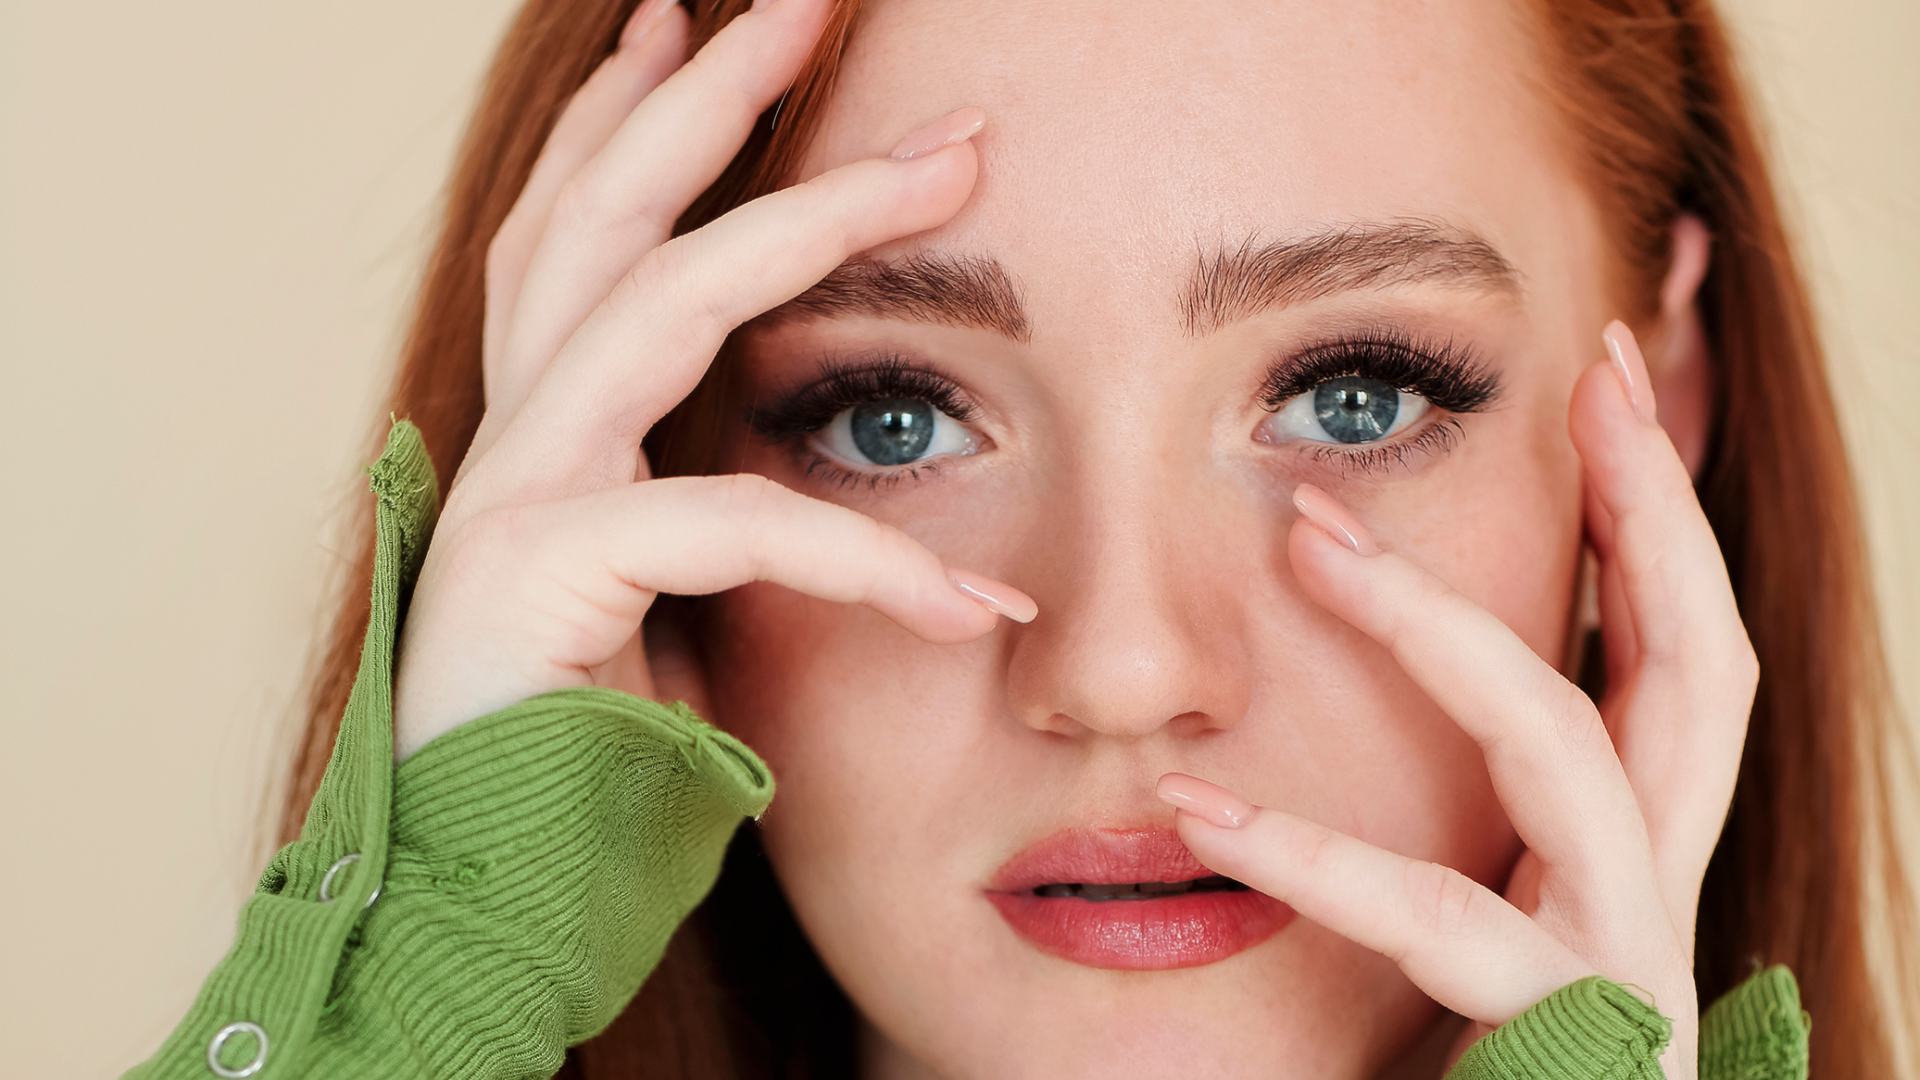 5 Redhead Makeup Tips If You Have Sensitive Eyes